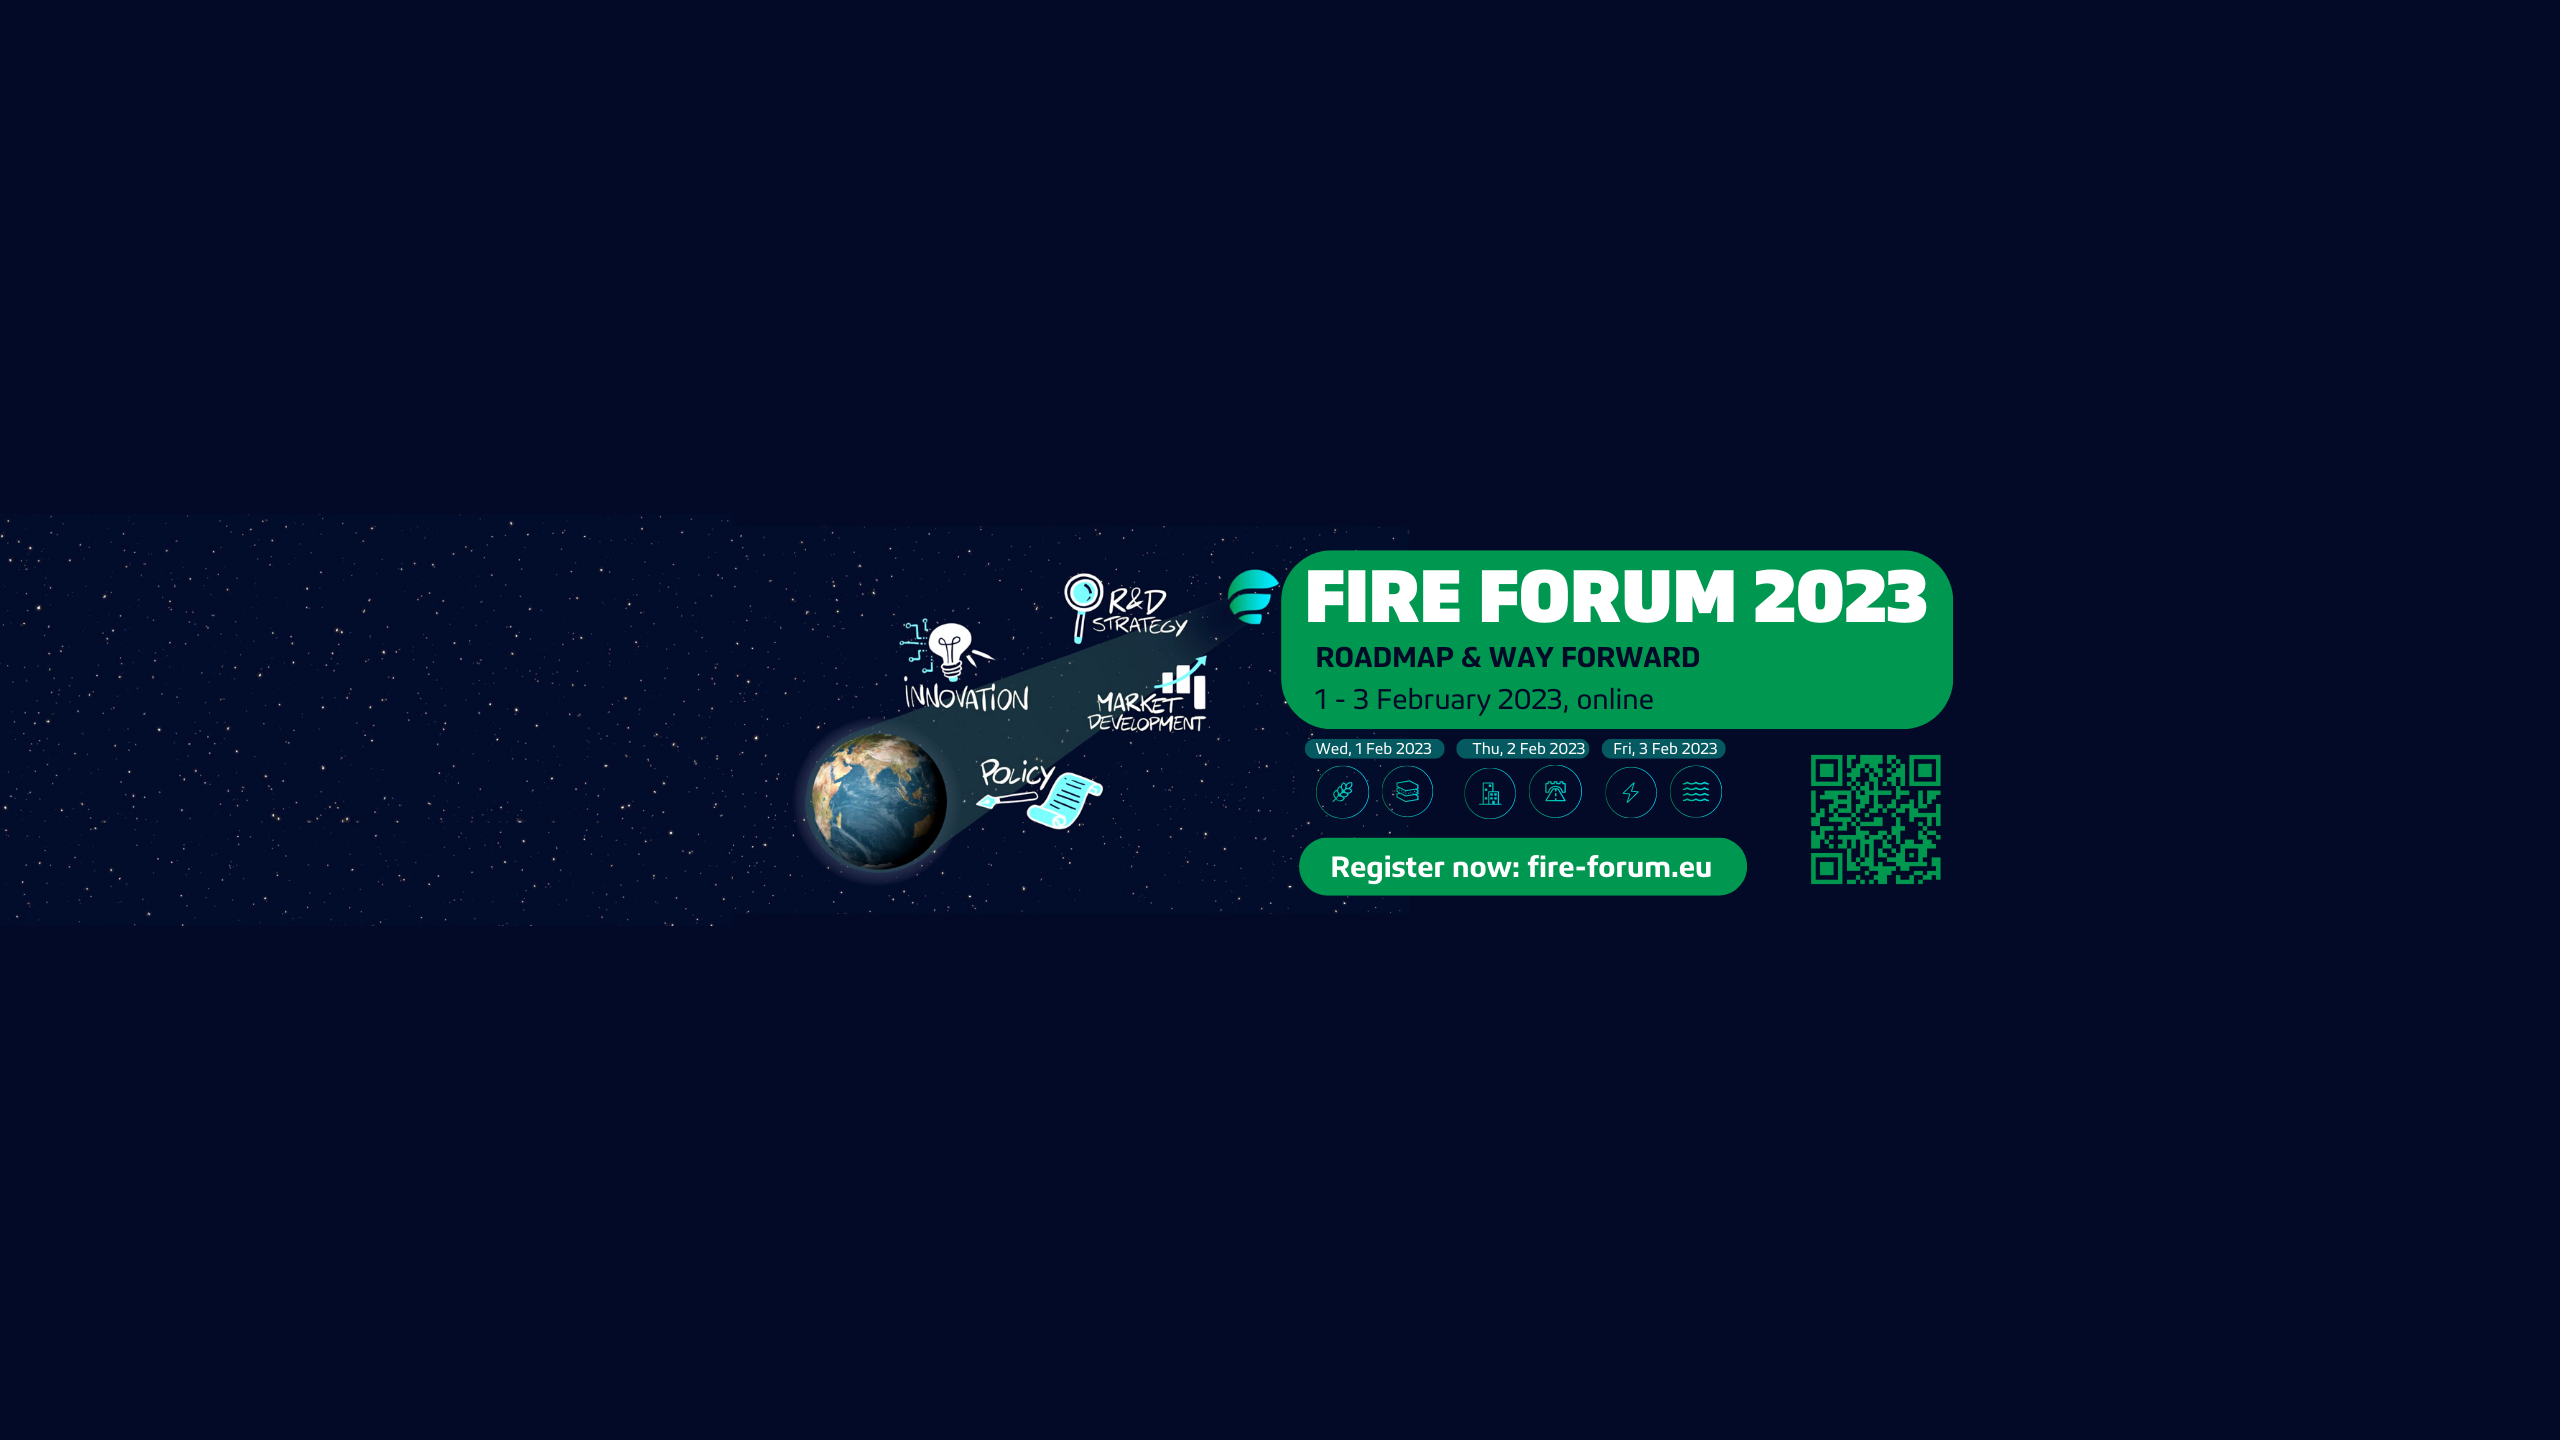 Join the FIRE Forum 2023 – the week on FIRE between 1st and 3rd February 2023 – to discover the research and innovation roadmap and discuss the way forward